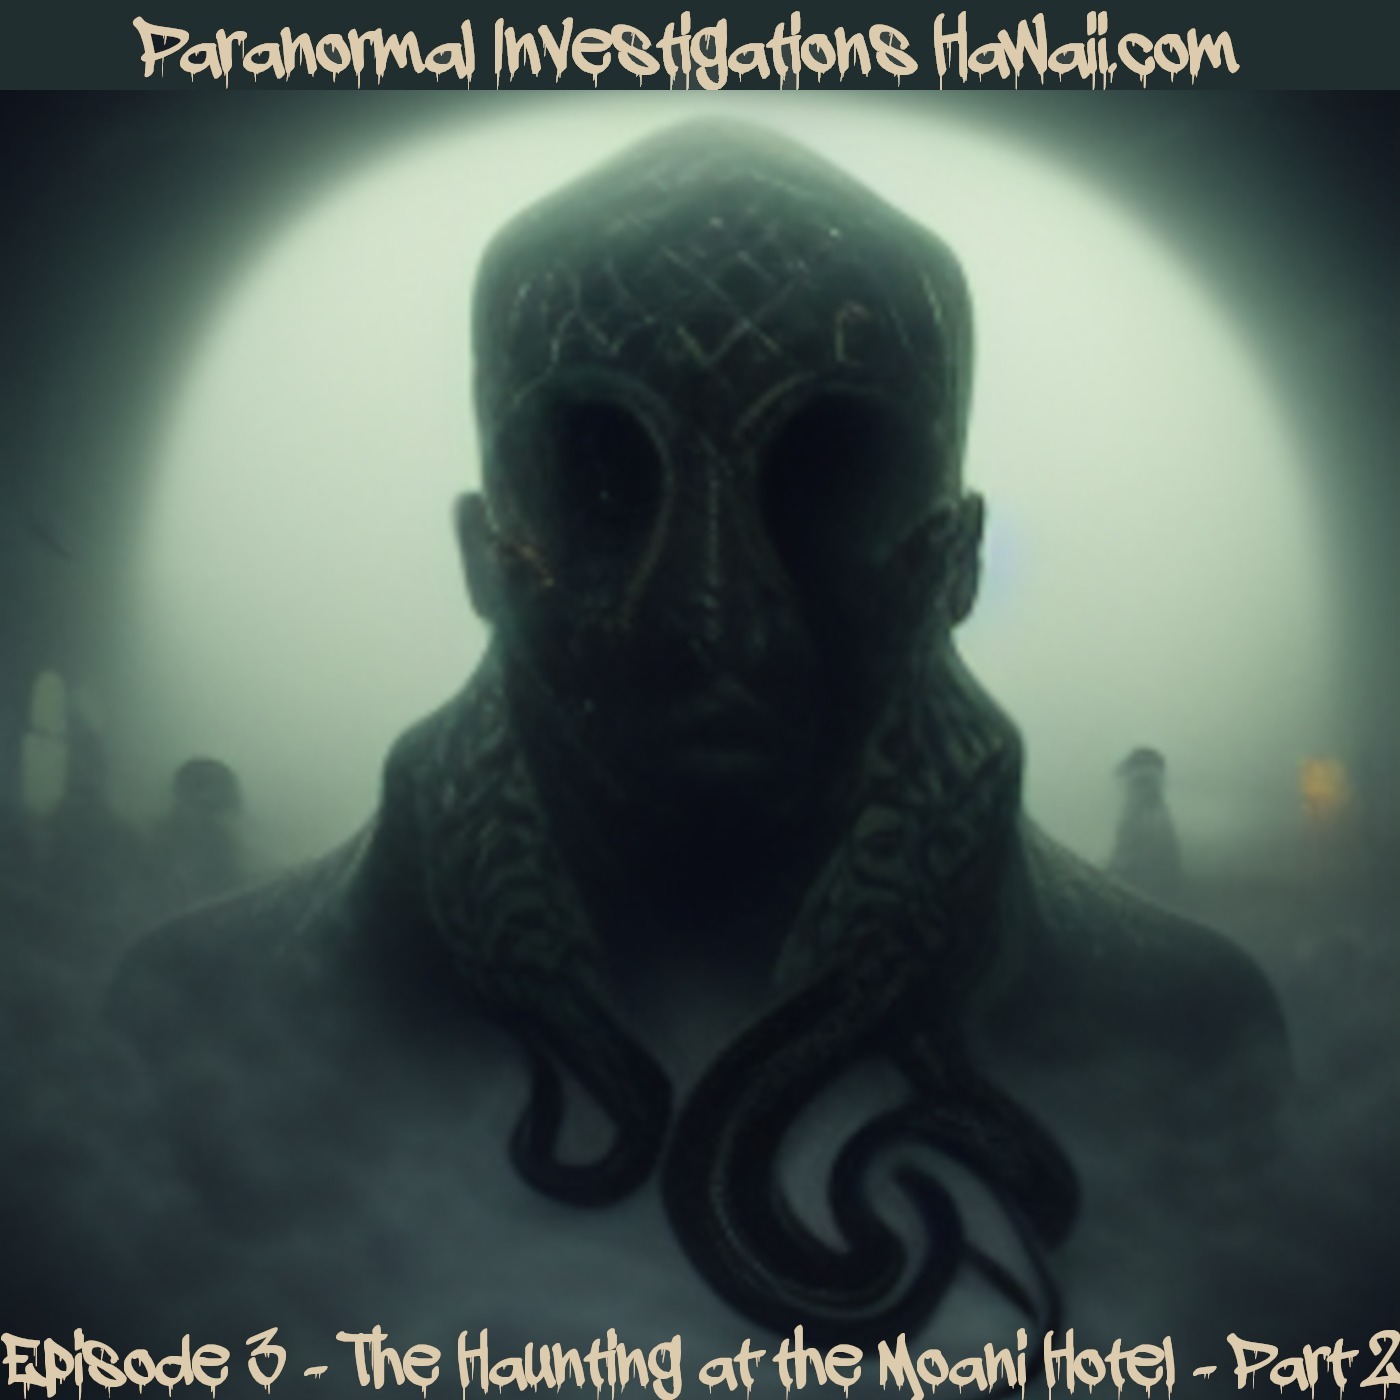 Preview: Episode 3 - The Haunting at the Moani Hotel - Part 2